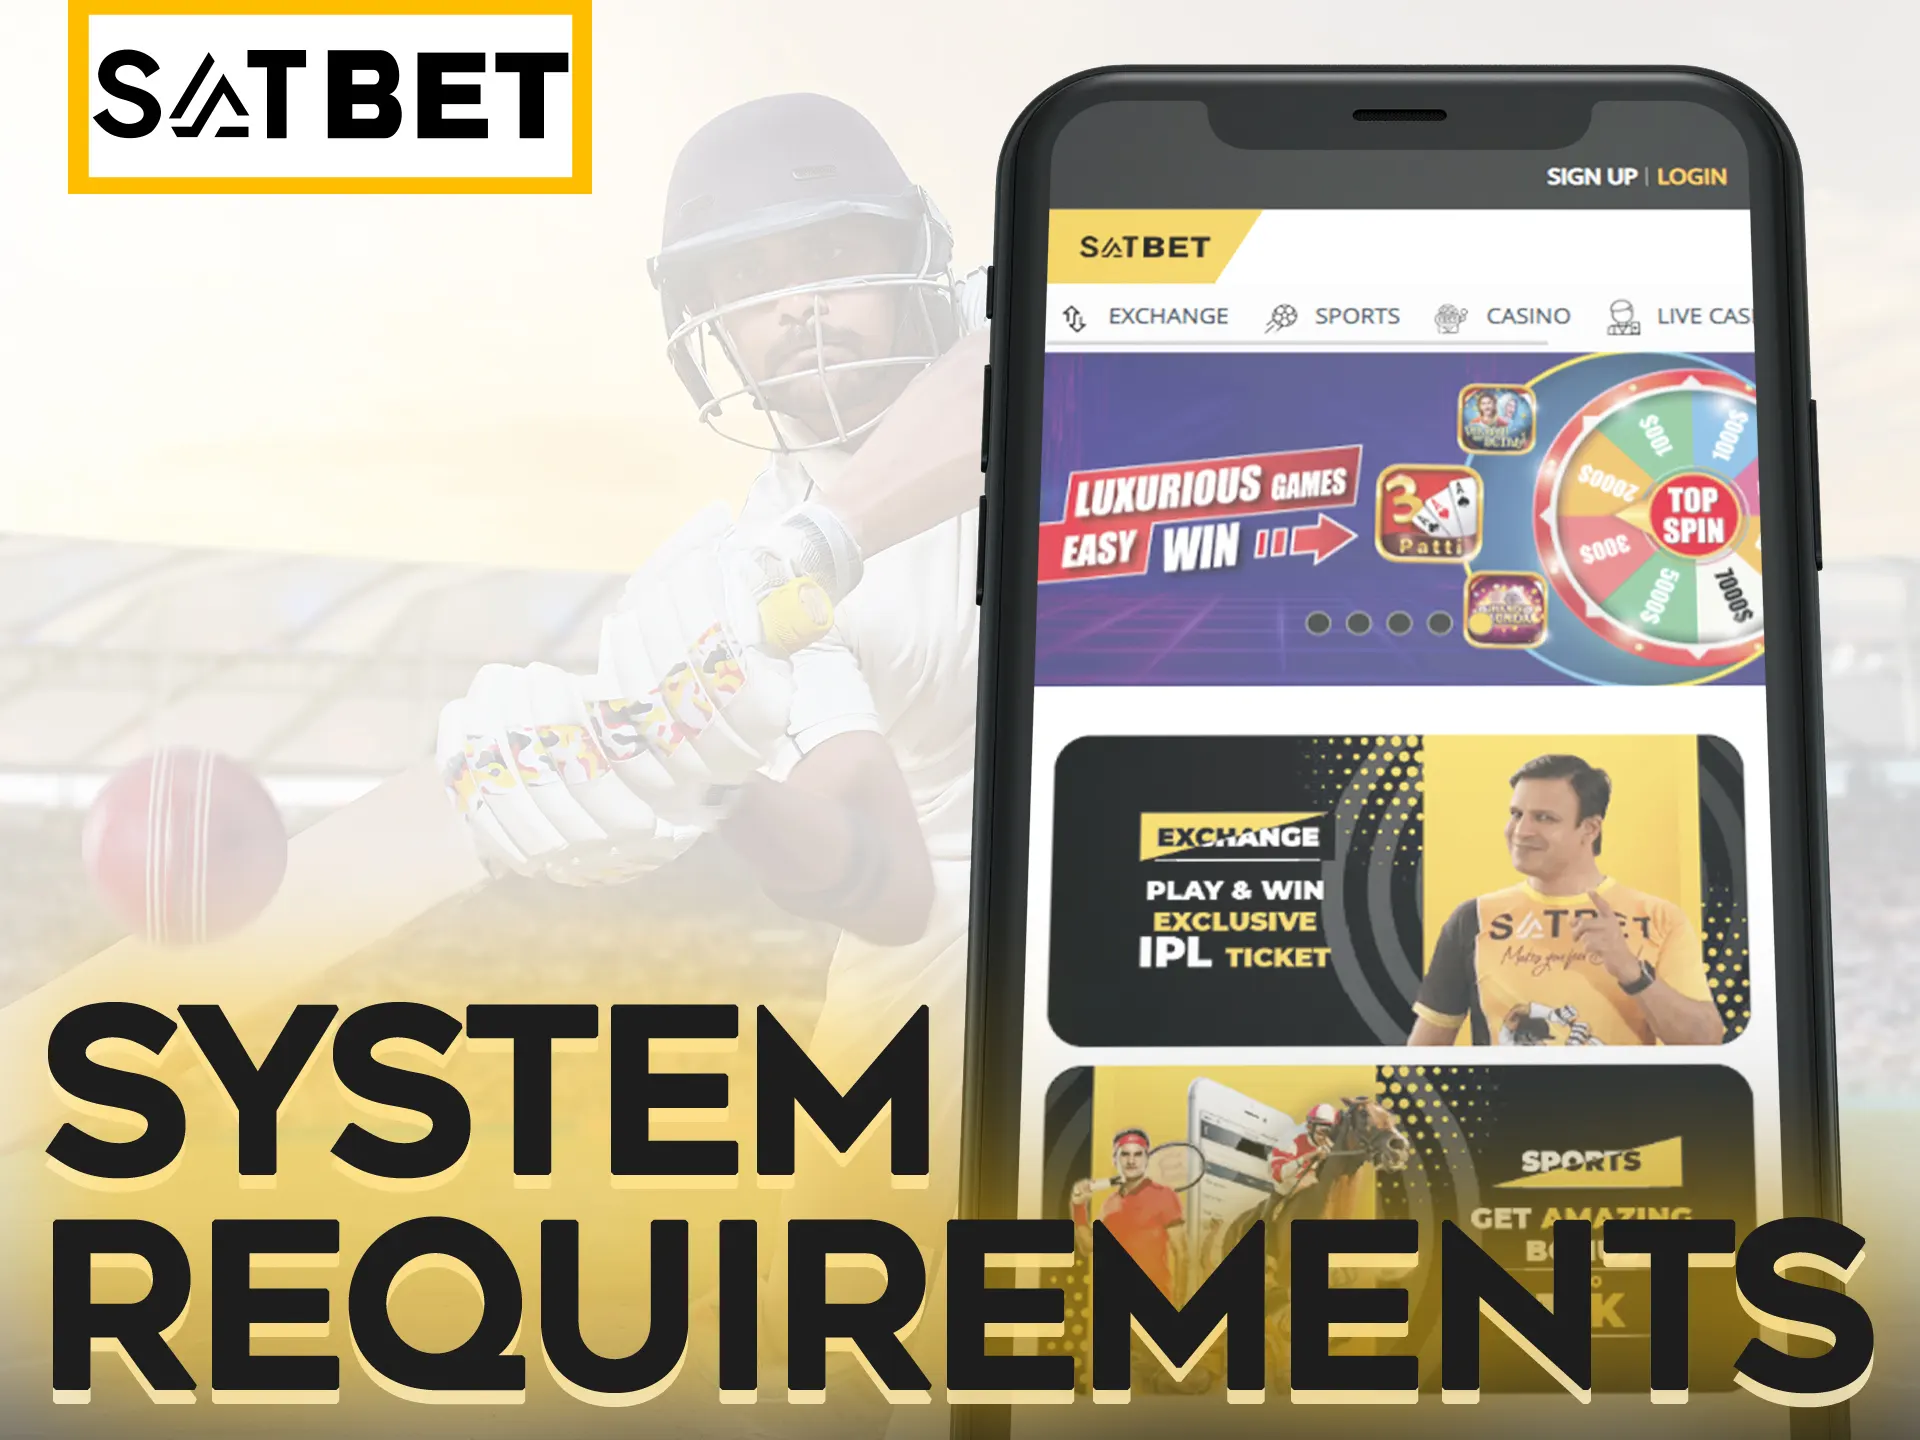 Satbet app has low system requirements.